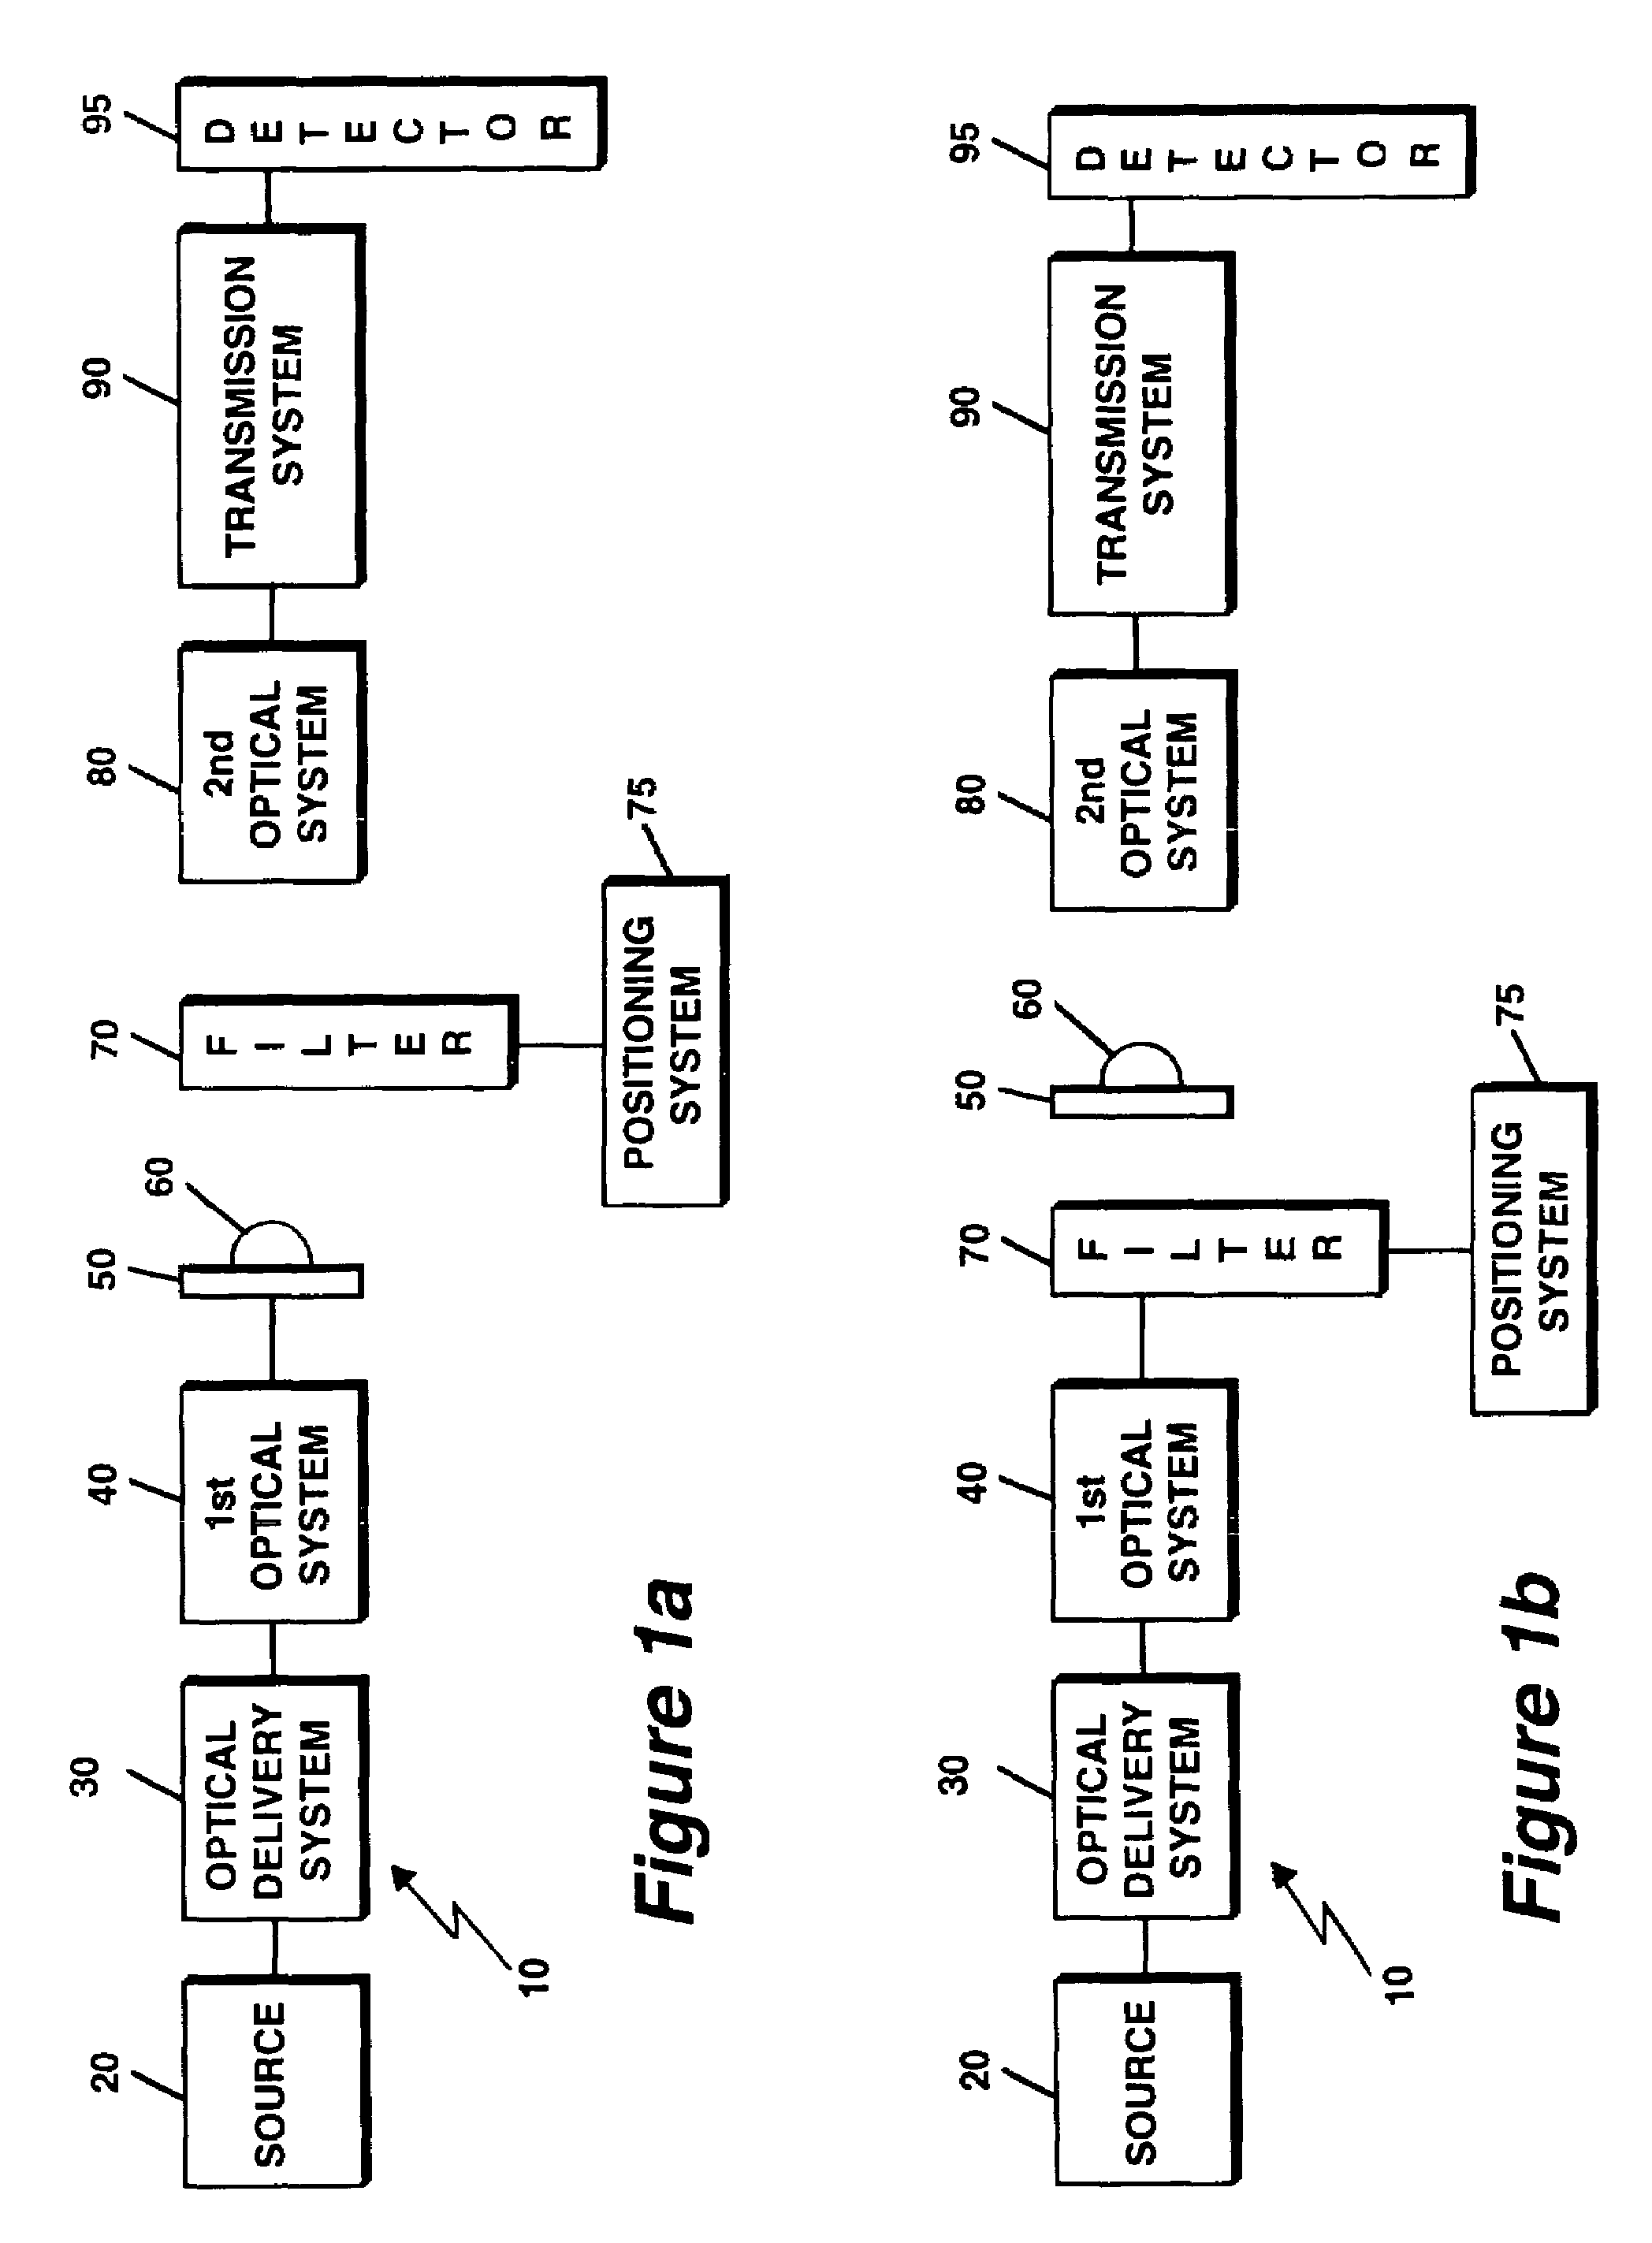 Systems and methods for wavelength selective measurement of properties of small volume liquid samples